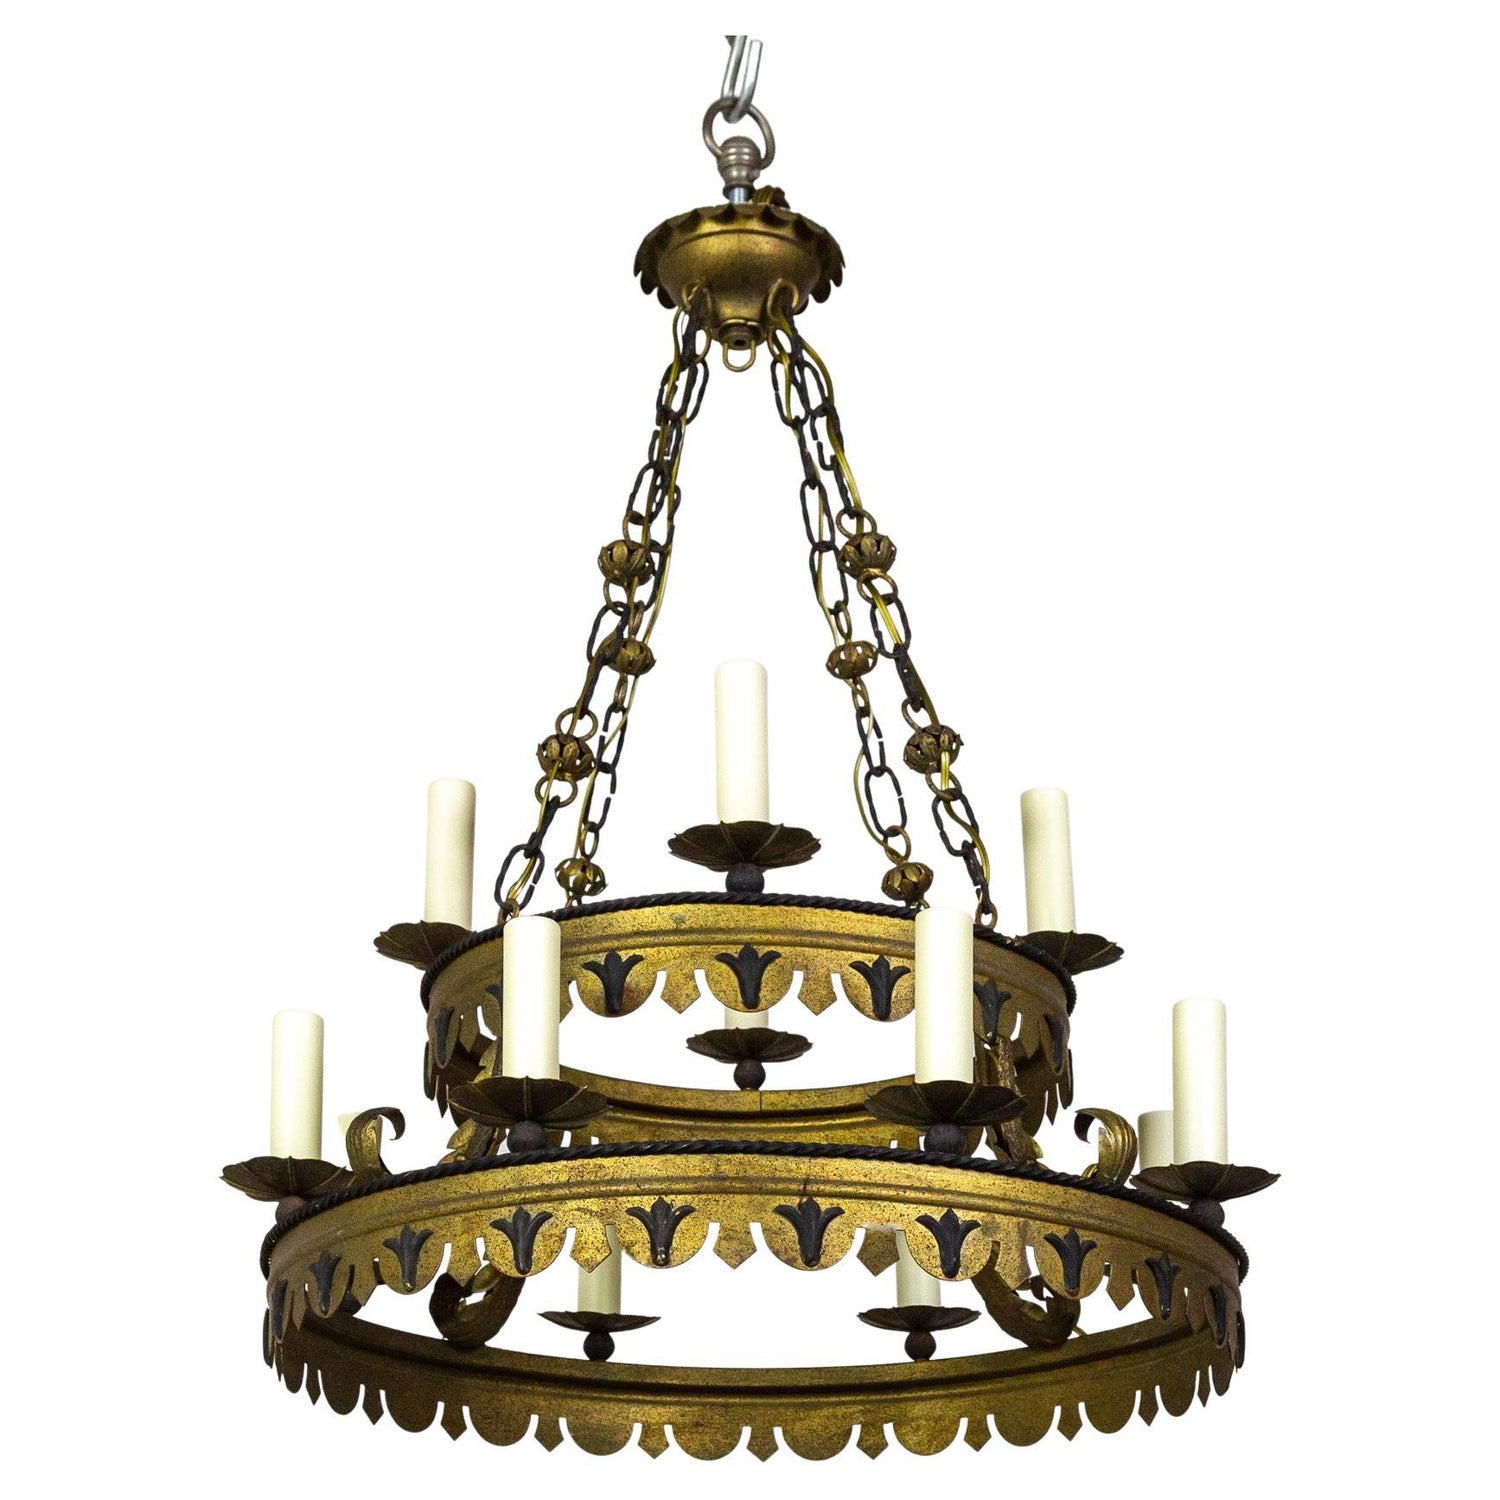 Polished Brass Flemish Chandelier - Two Size Options